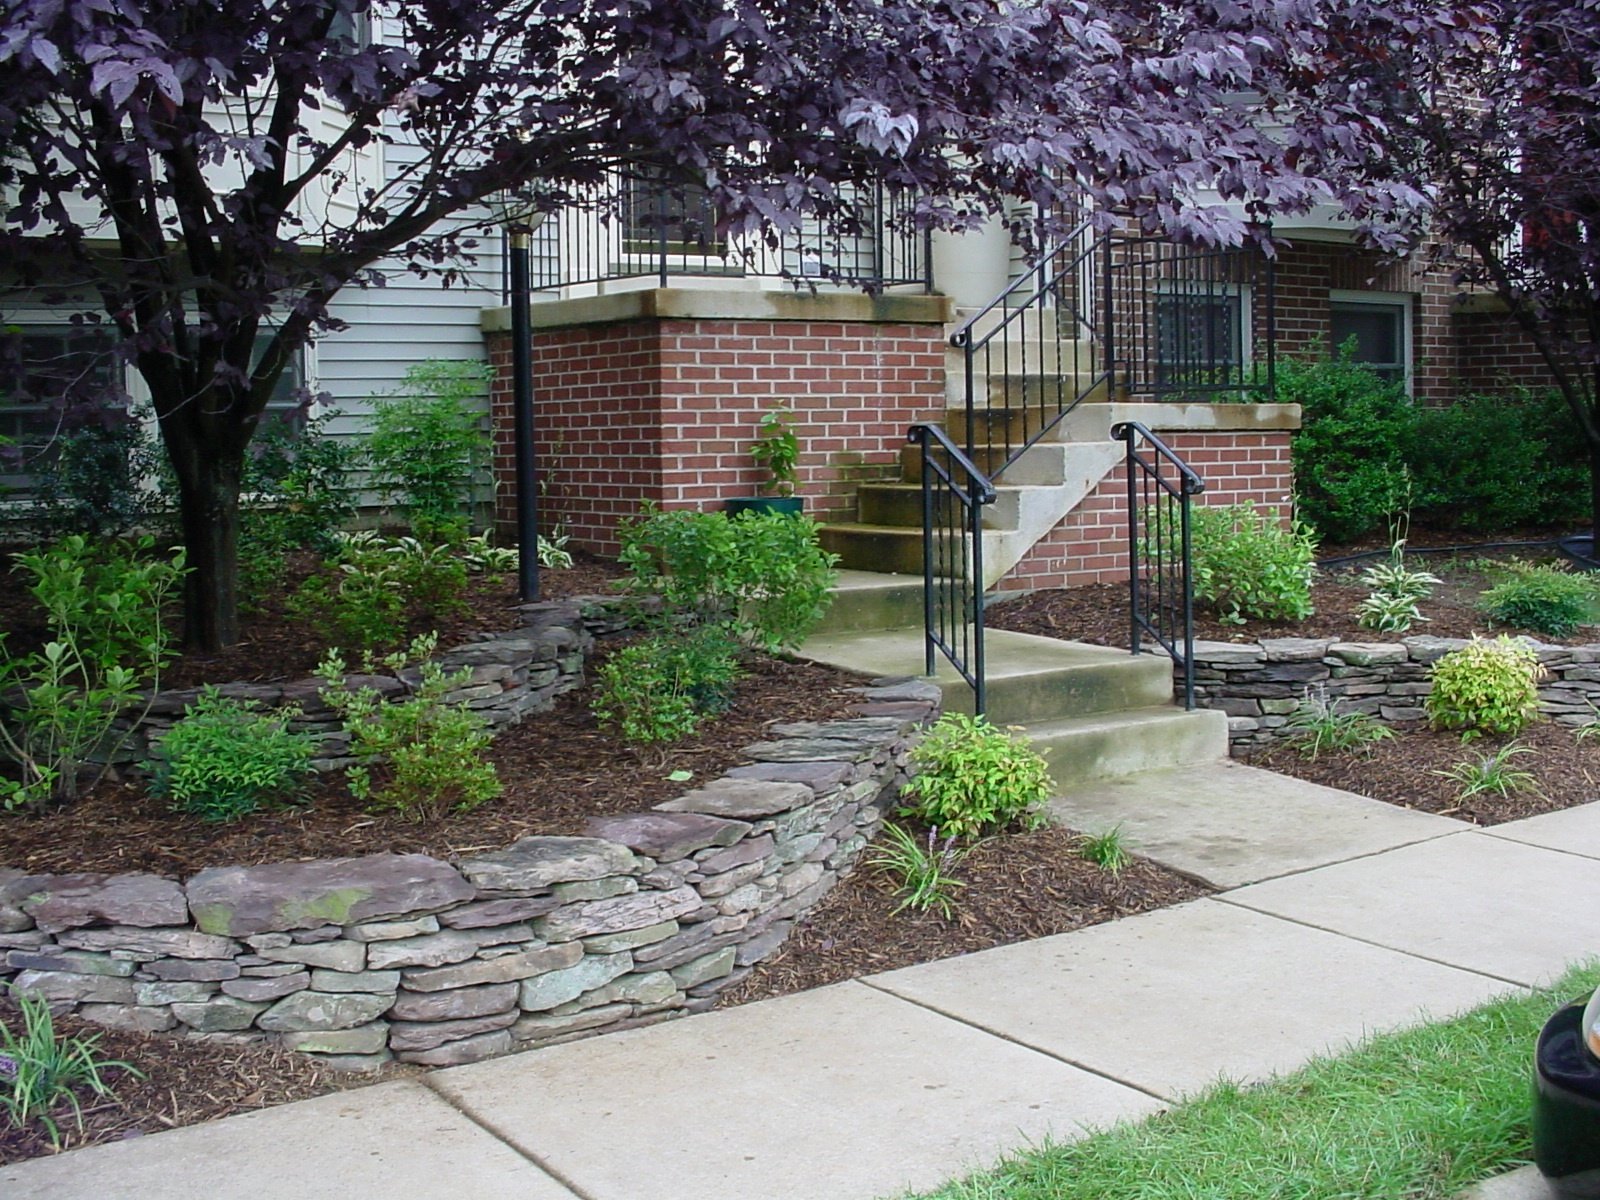 Creative townhouse landscape with trees, shrubs, and natural stone